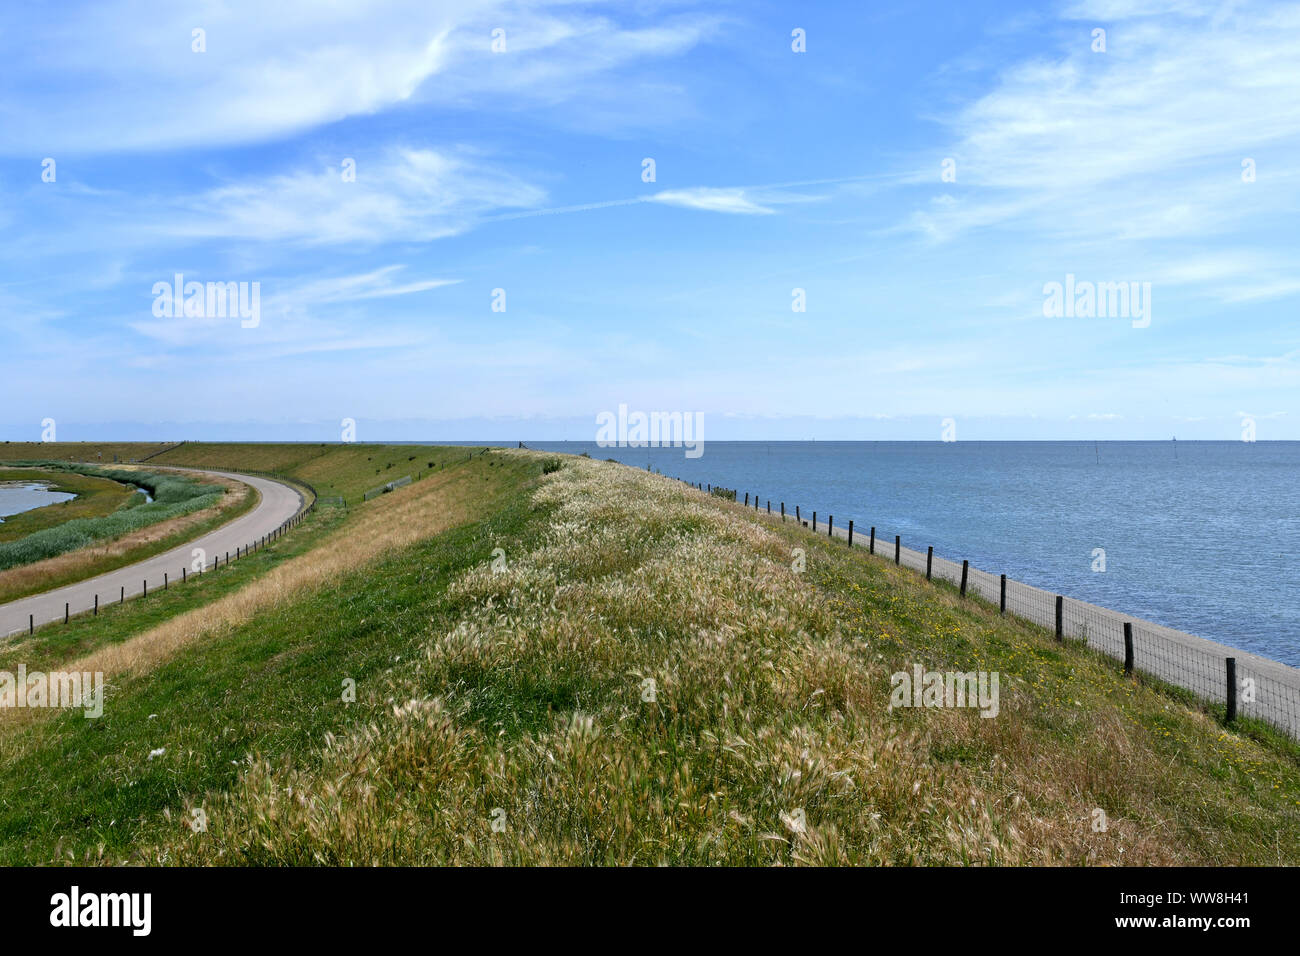 view from a dike with the land on the left and the Northsea on the right Stock Photo